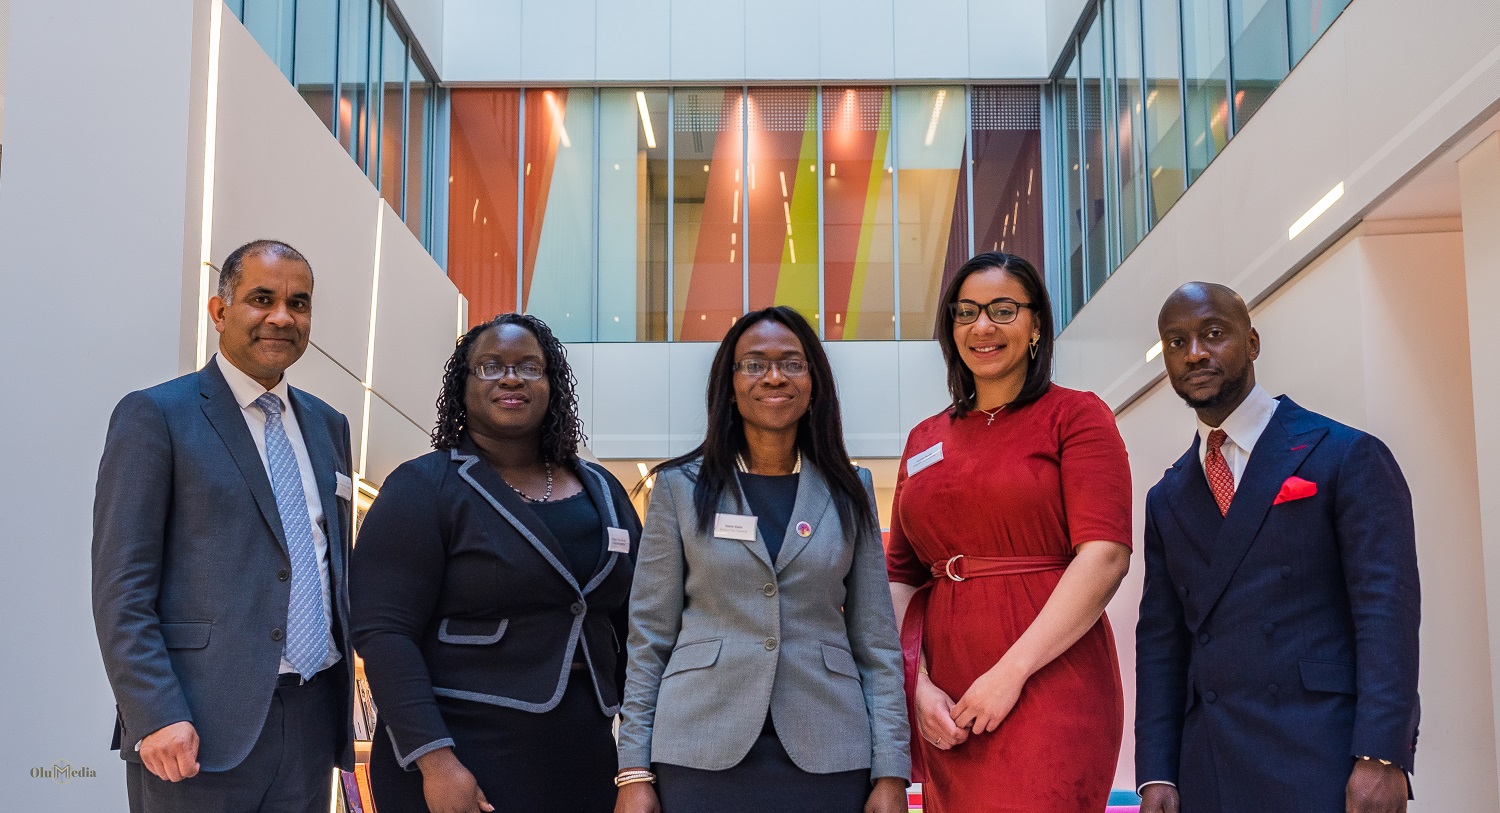 BAME support network launched by Burges Salmon with aim of moving from diversity to inclusion